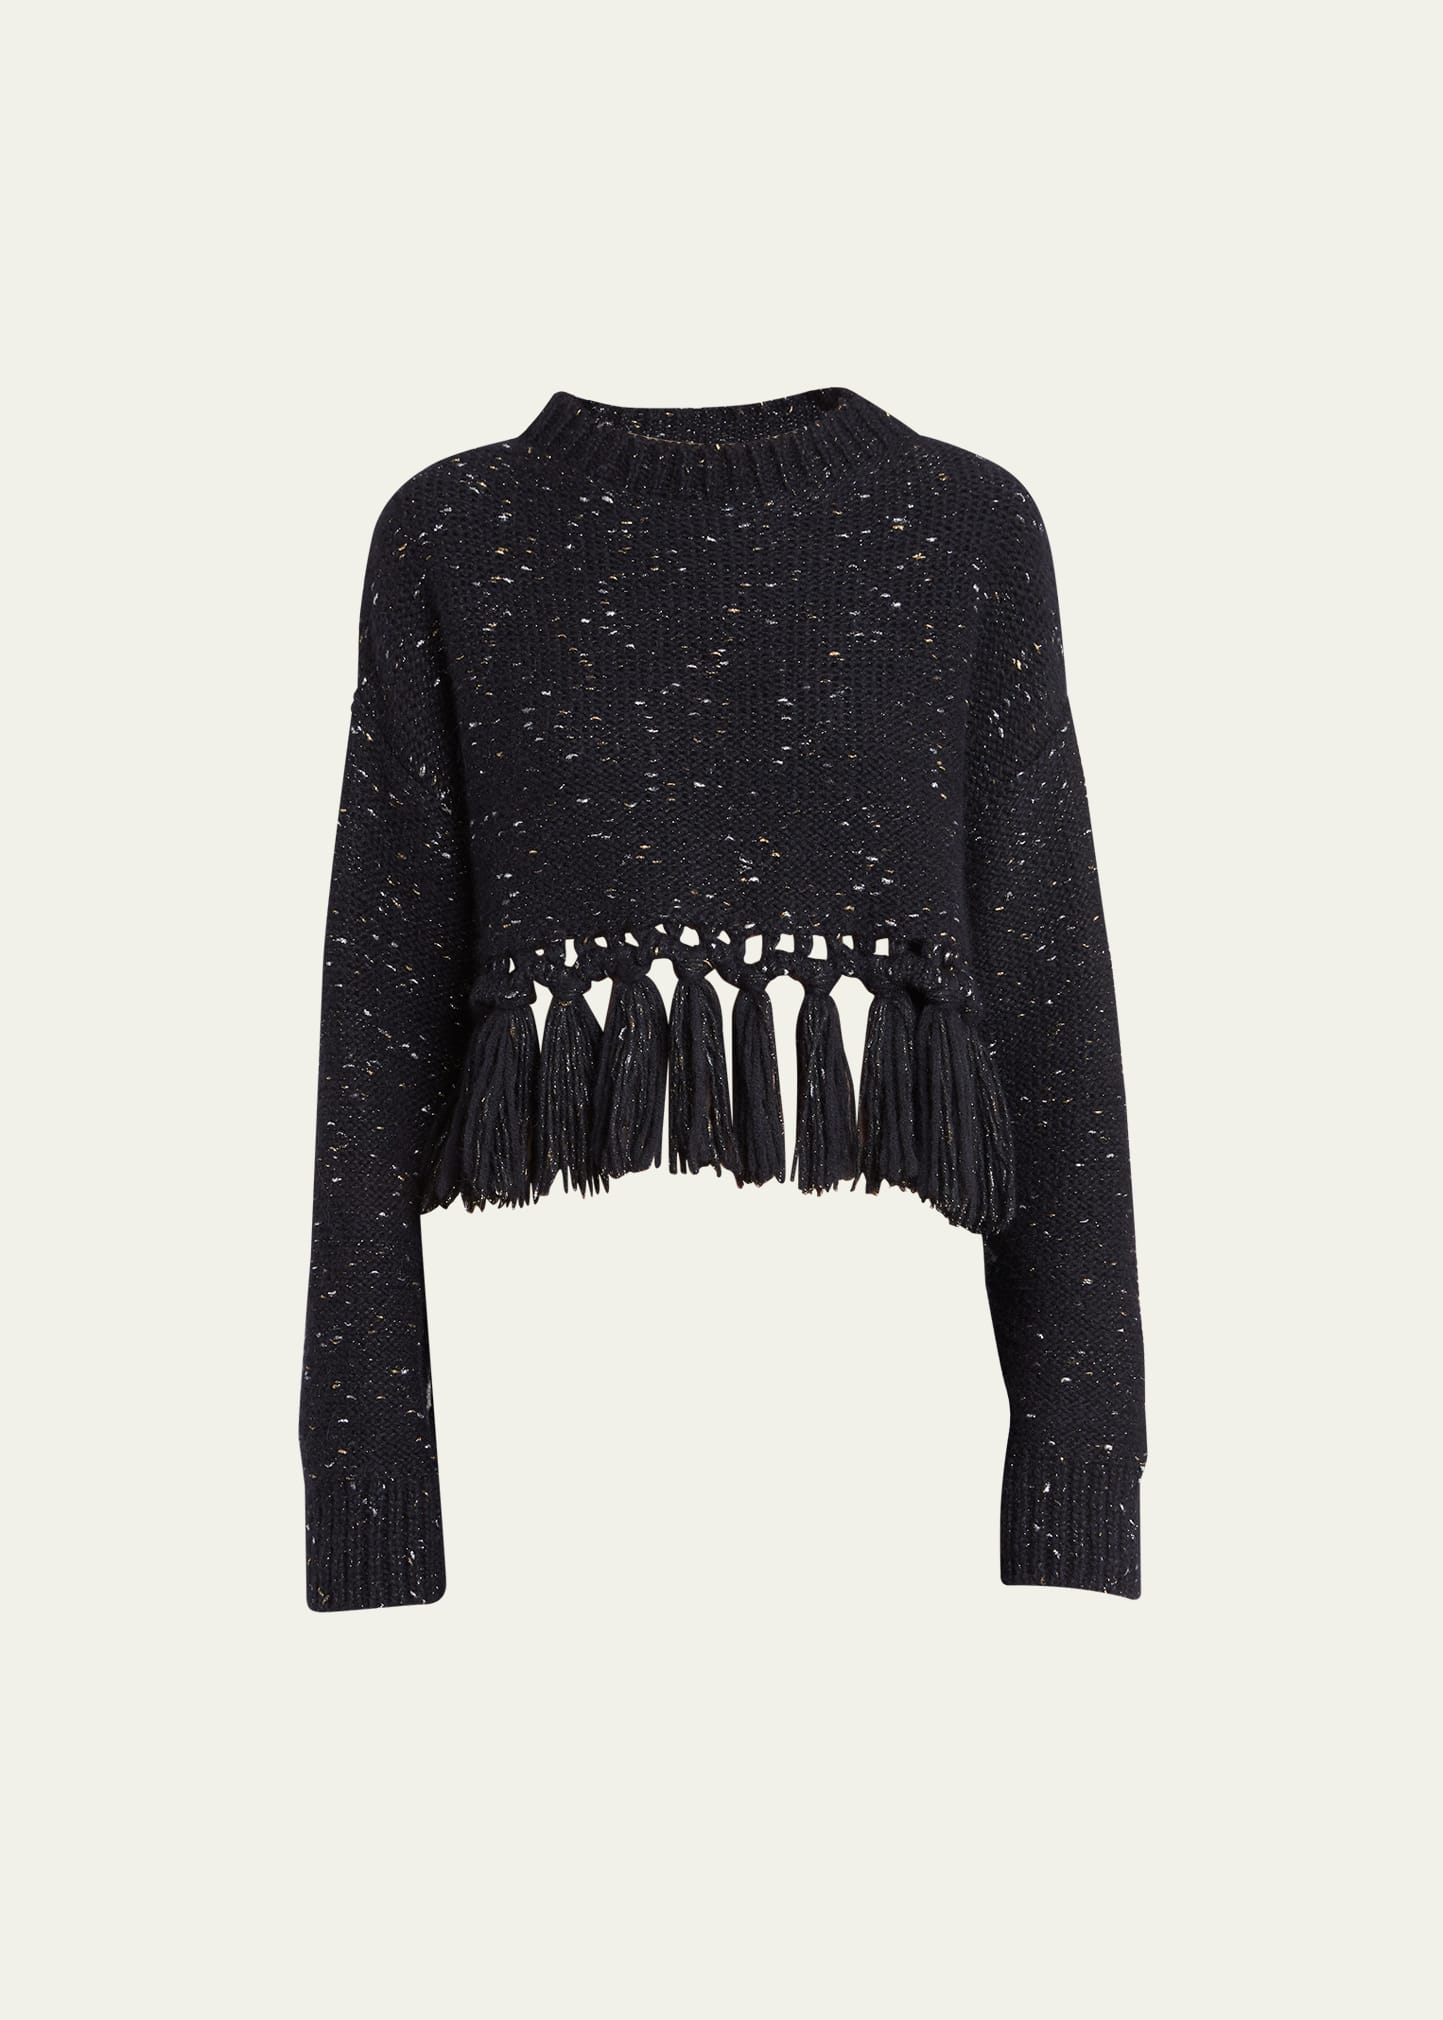 The Astral Metallic-Knit Cropped Sweater